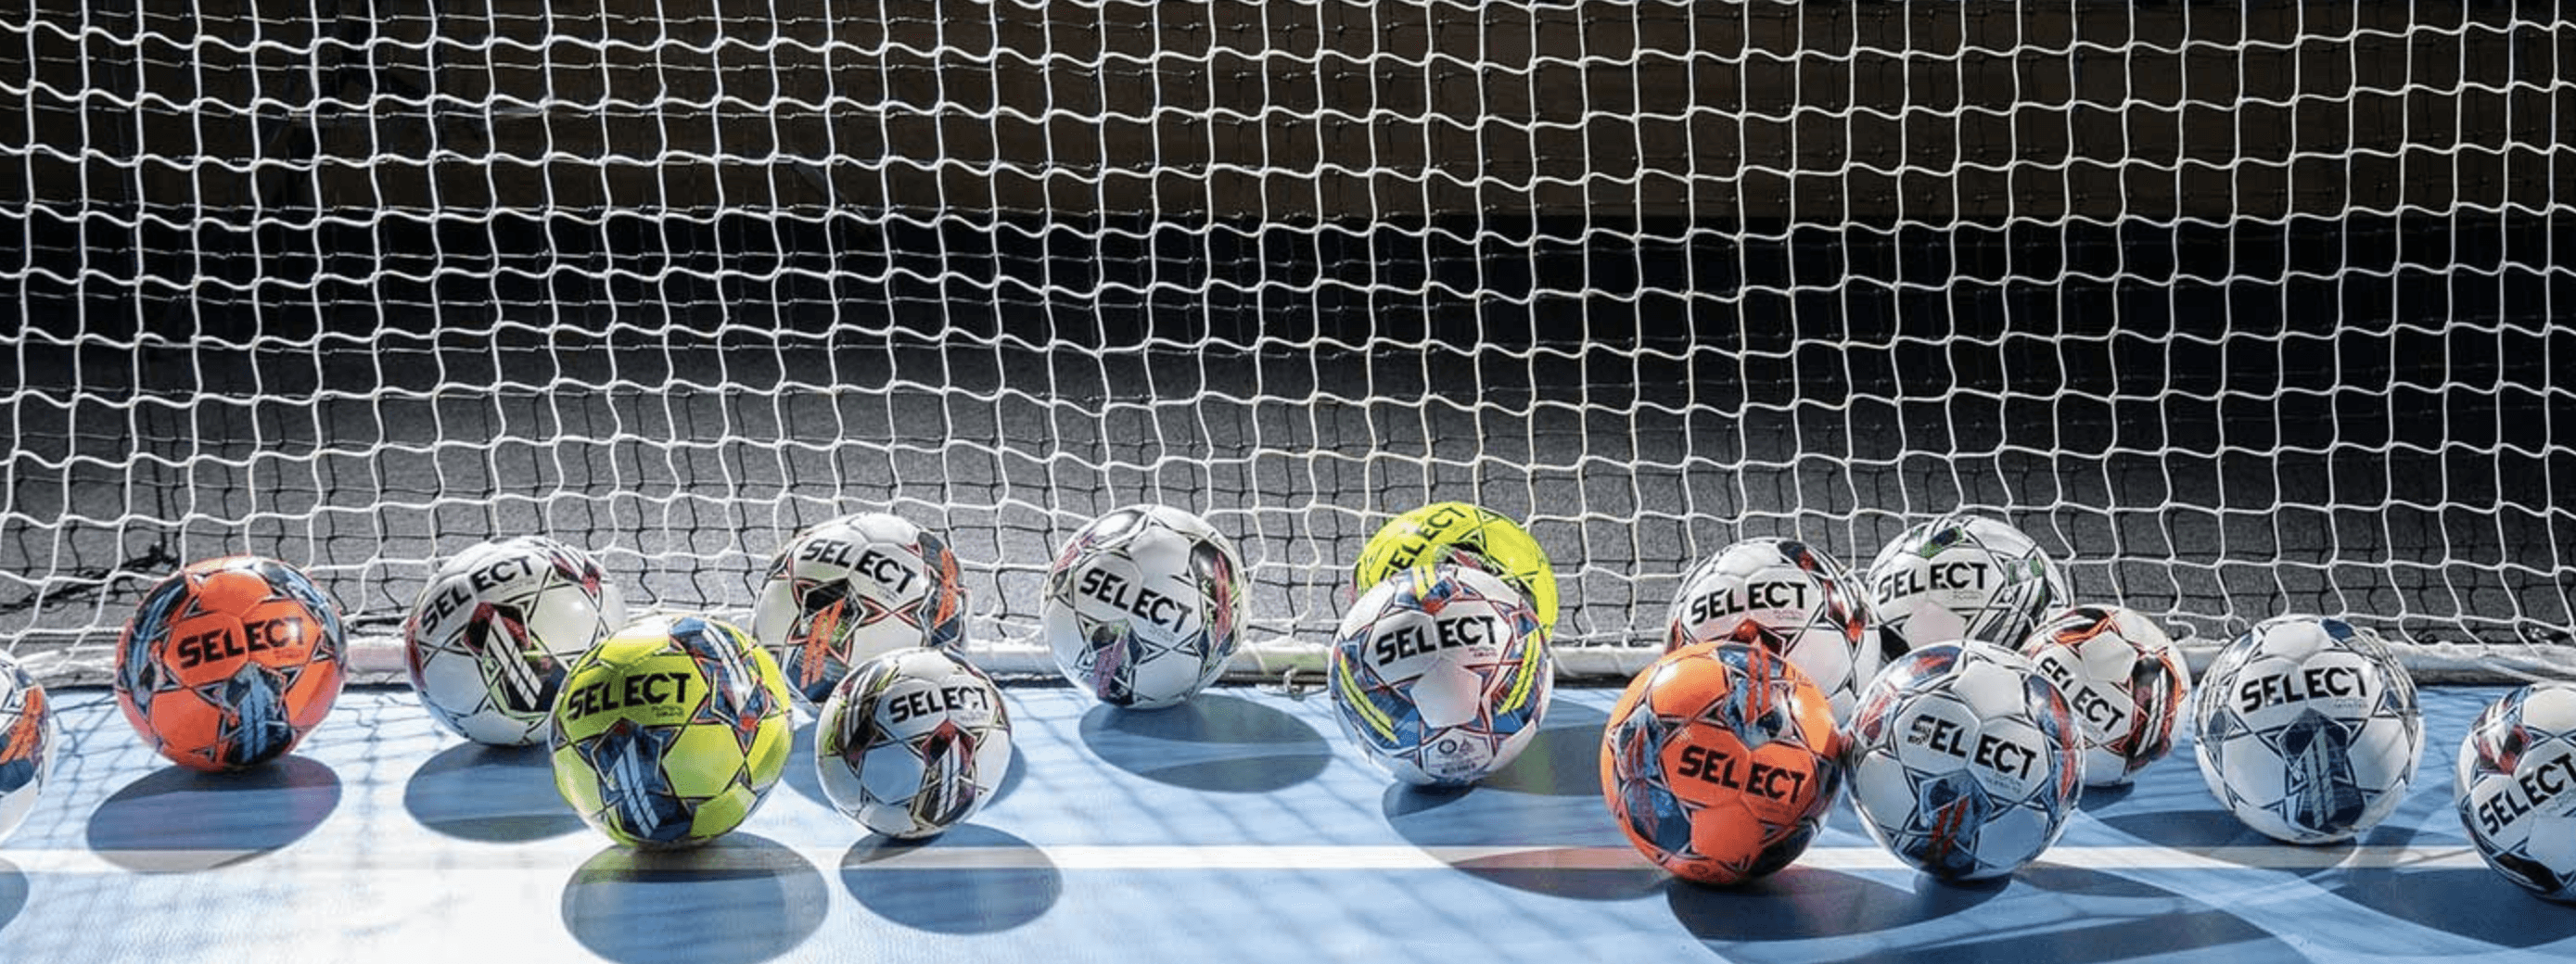 What is Futsal? How is the ball different from a standard soccer ball?